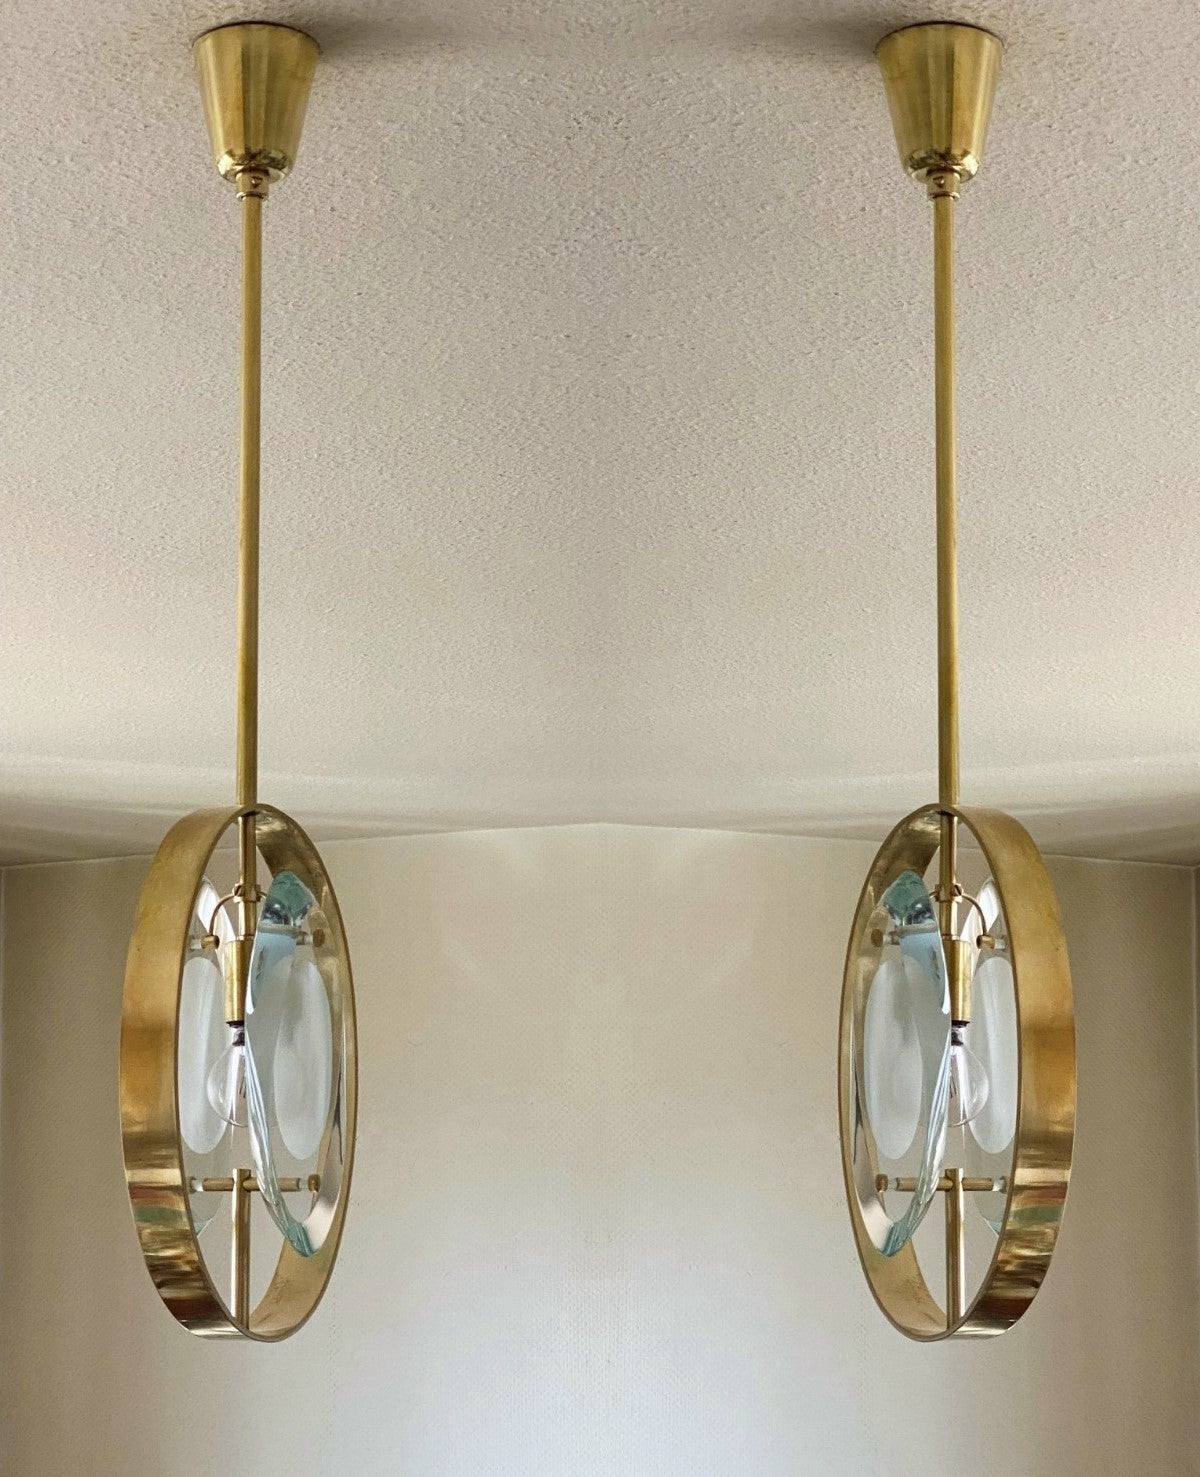 A pair of  iconic design pendants by Max Ingrand for Fontana Arte, Model 1933, Italy, 1961. Organically shaped double lens cut panels of thick profiled polished Murano glass with sandblasted centers fitted within a natural brass ring suspended from